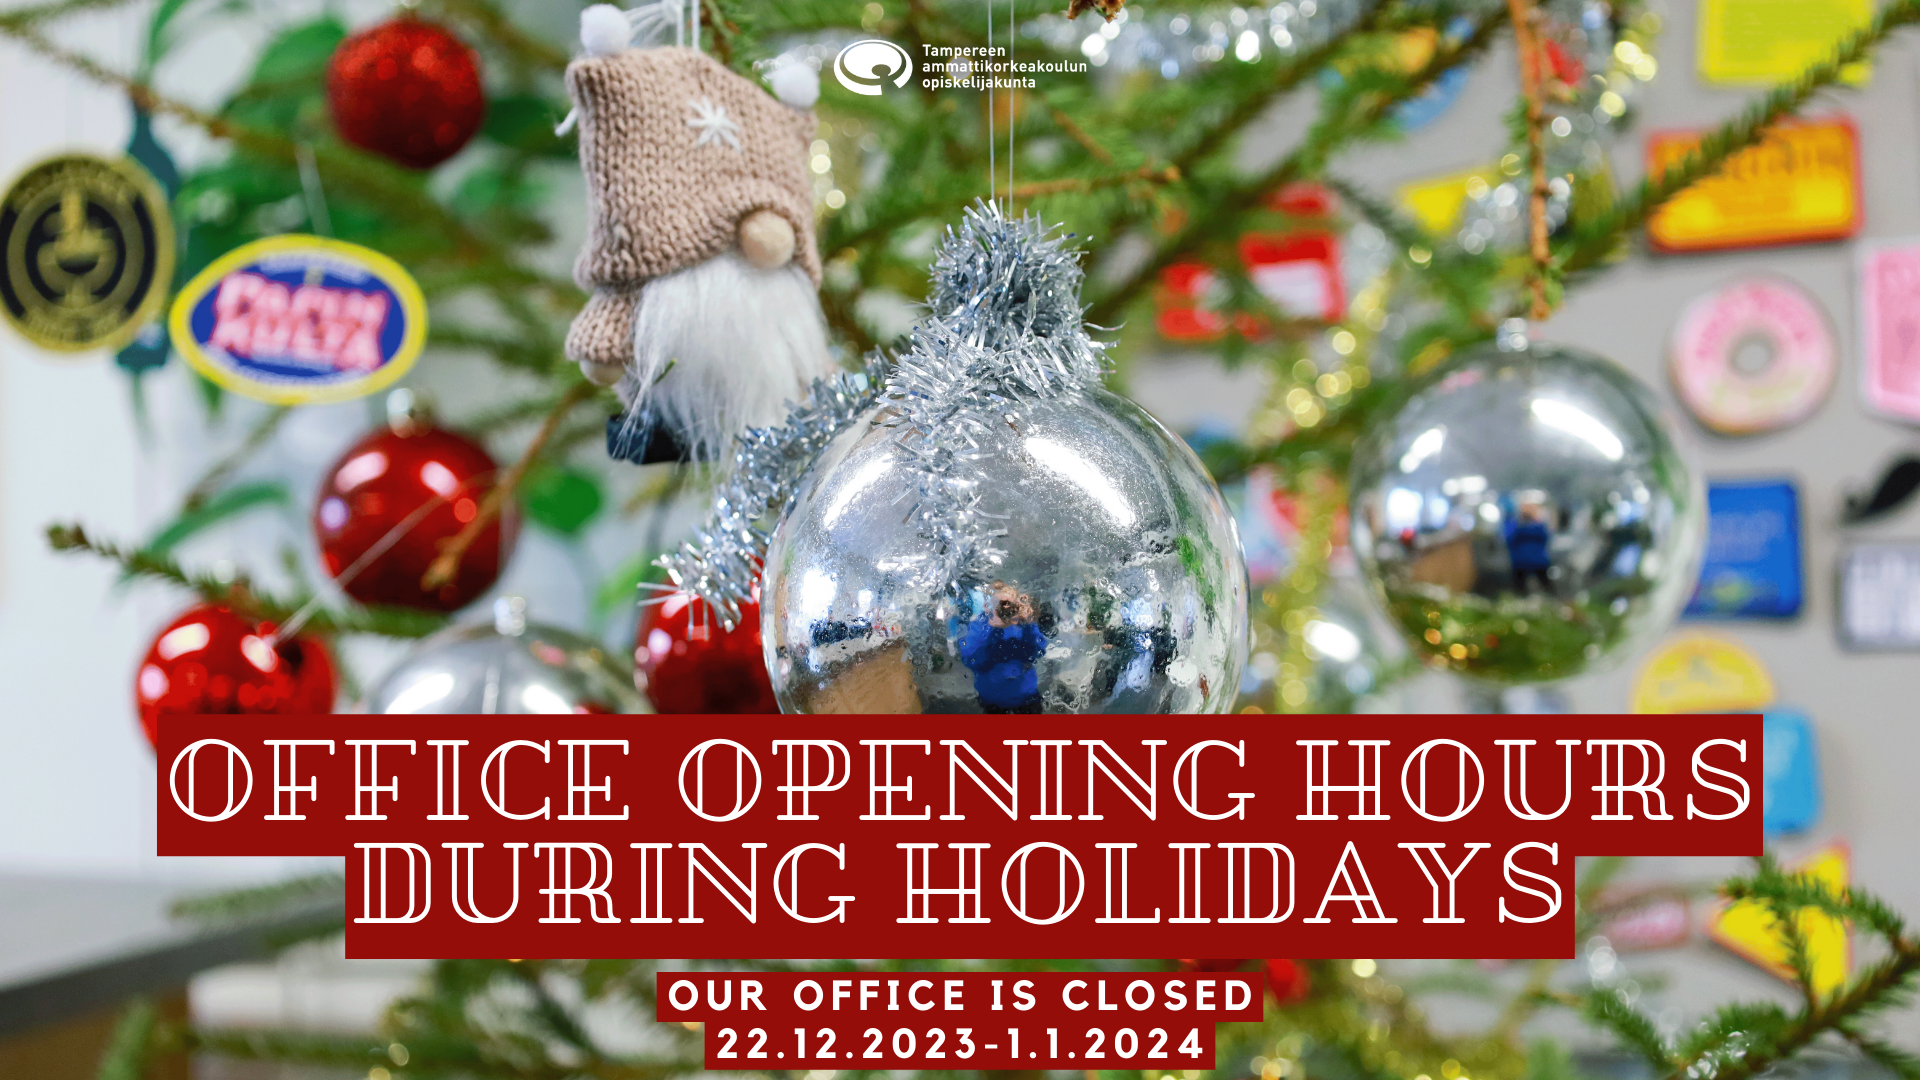 Solu opening hours during holidays